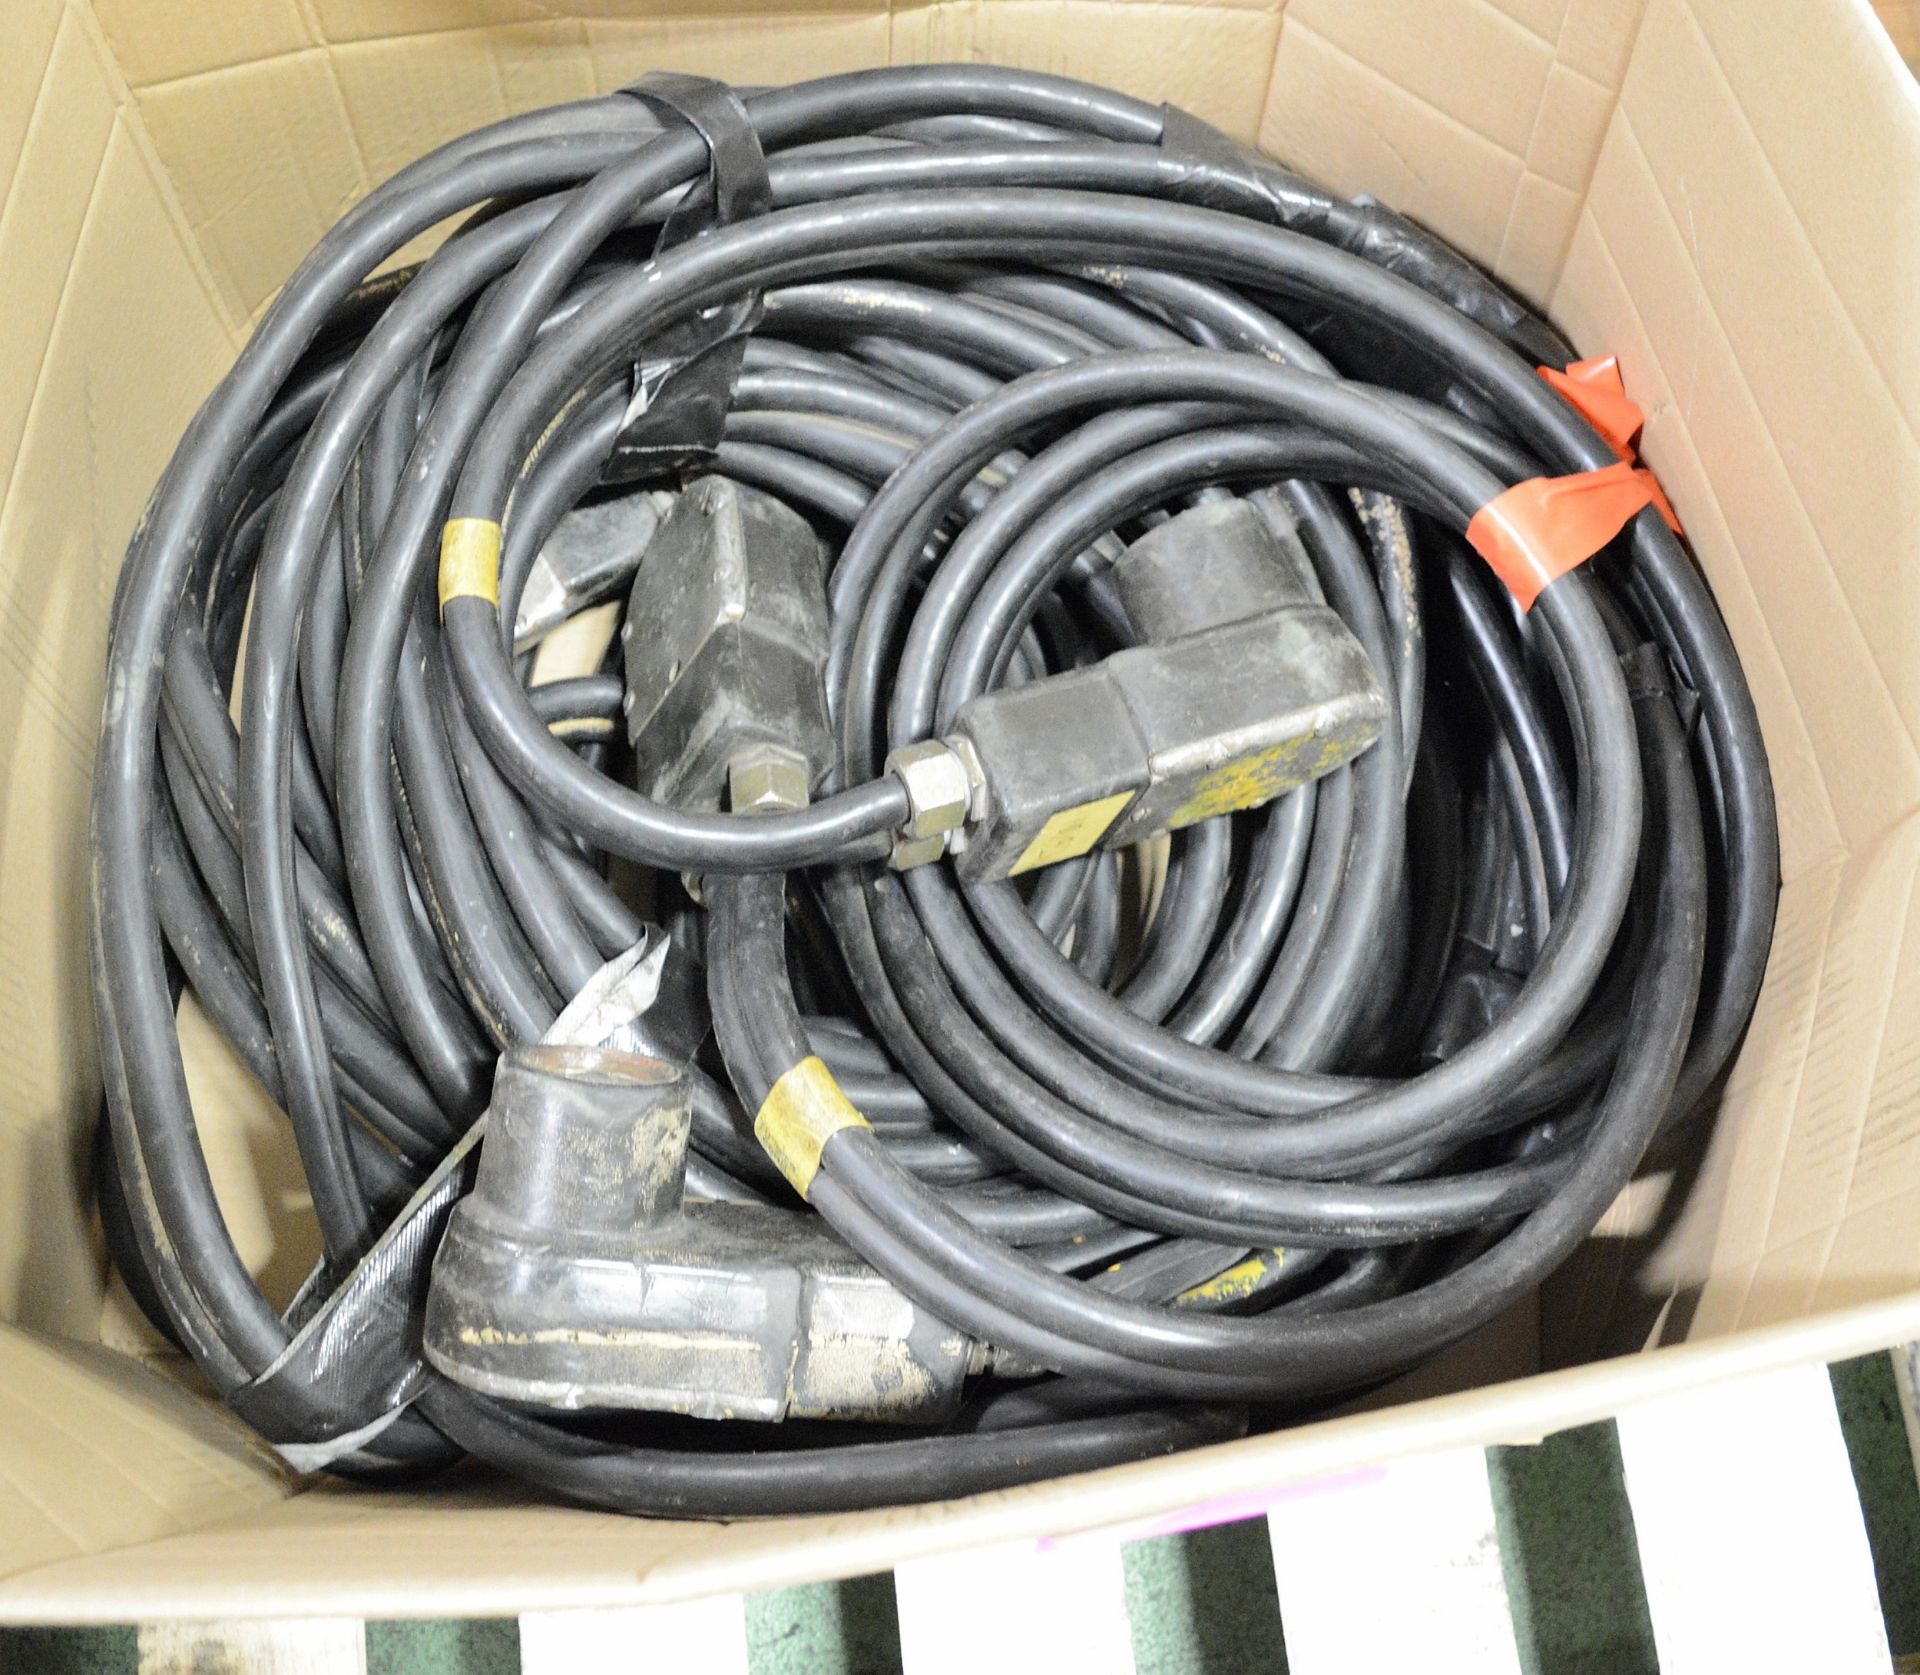 3x Intervehicle Electrical Cable Assemblies - Image 2 of 2